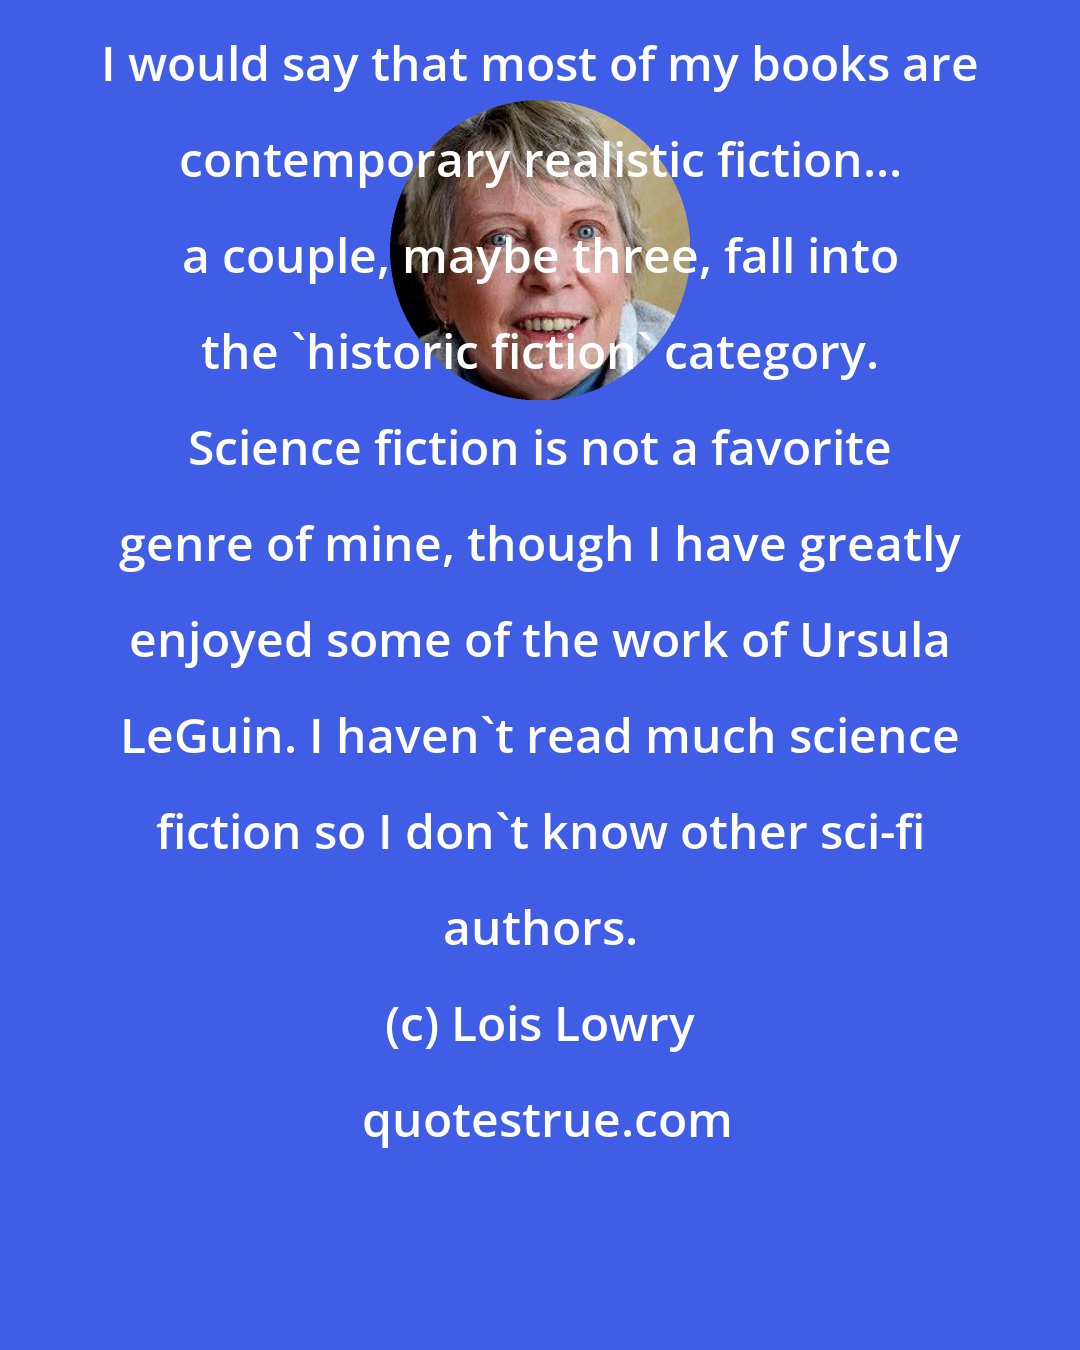 Lois Lowry: I would say that most of my books are contemporary realistic fiction... a couple, maybe three, fall into the 'historic fiction' category. Science fiction is not a favorite genre of mine, though I have greatly enjoyed some of the work of Ursula LeGuin. I haven't read much science fiction so I don't know other sci-fi authors.